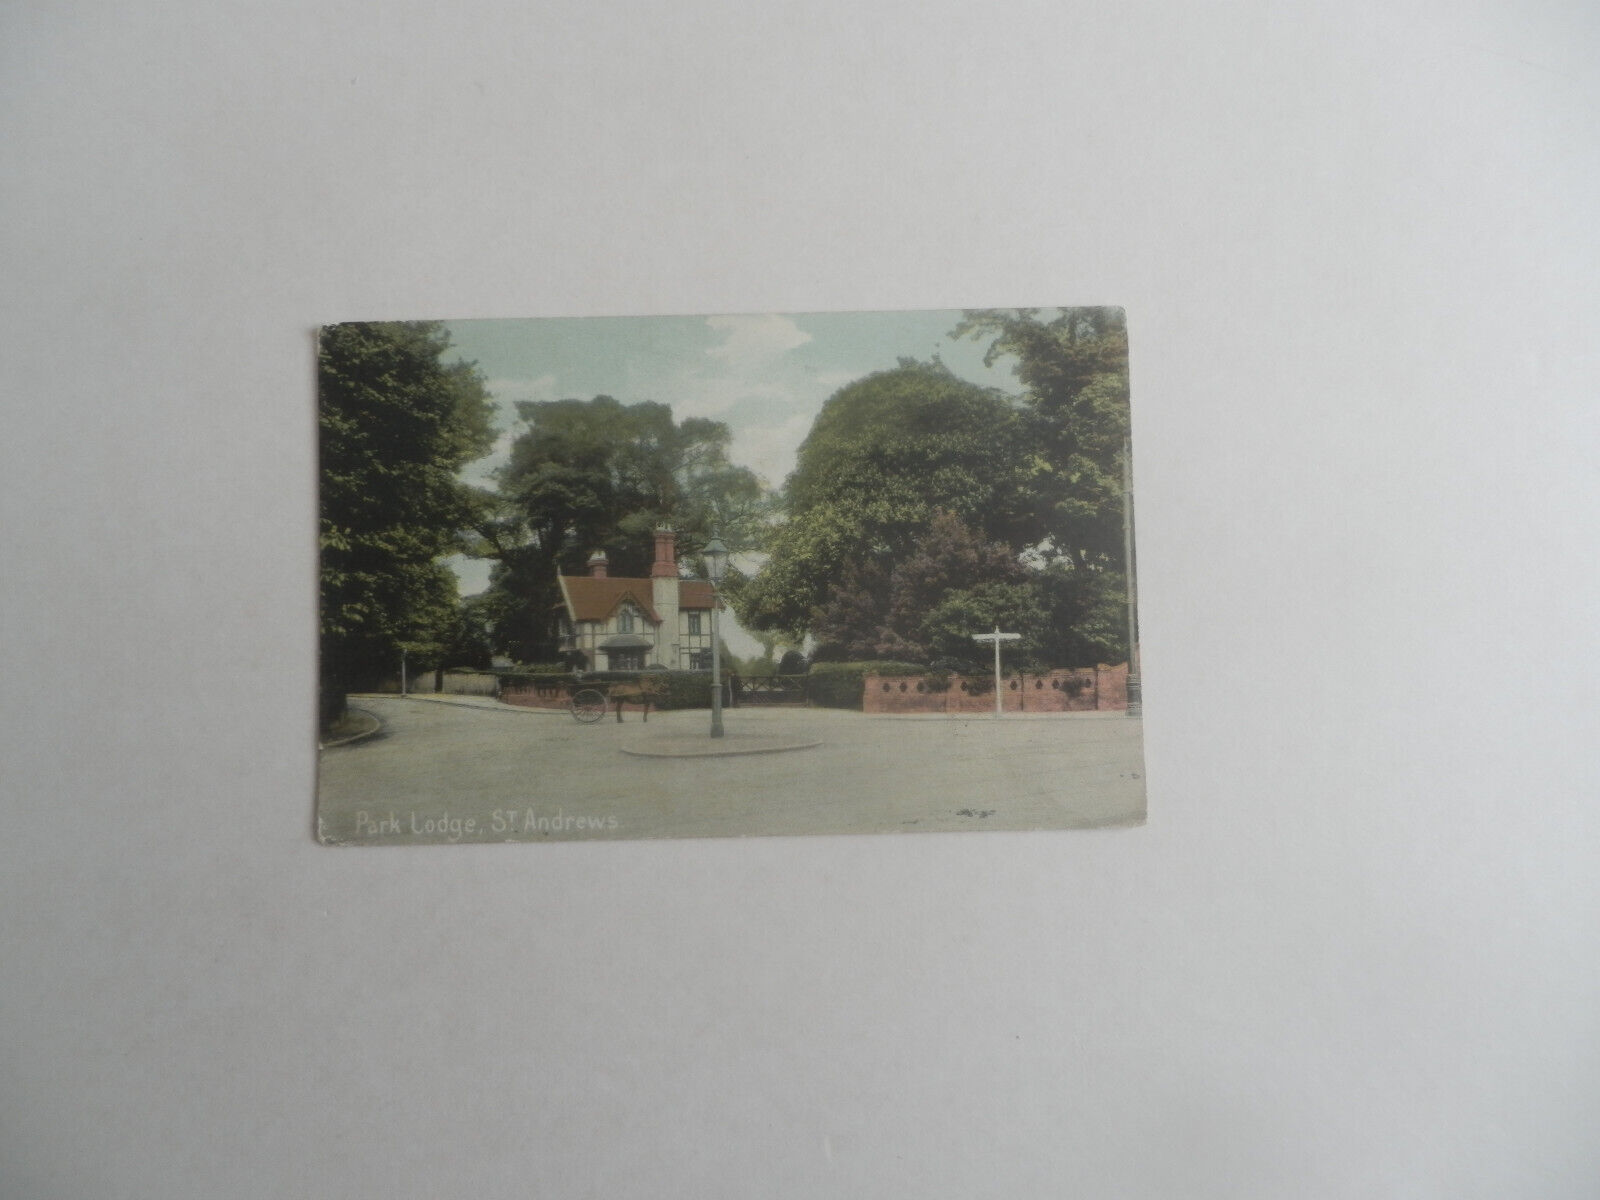 House Clearance - 1905 POSTCARD PARK LODGE, ST ANDREWS, POSTED UXBRIDGE TO WHITLEY BAY